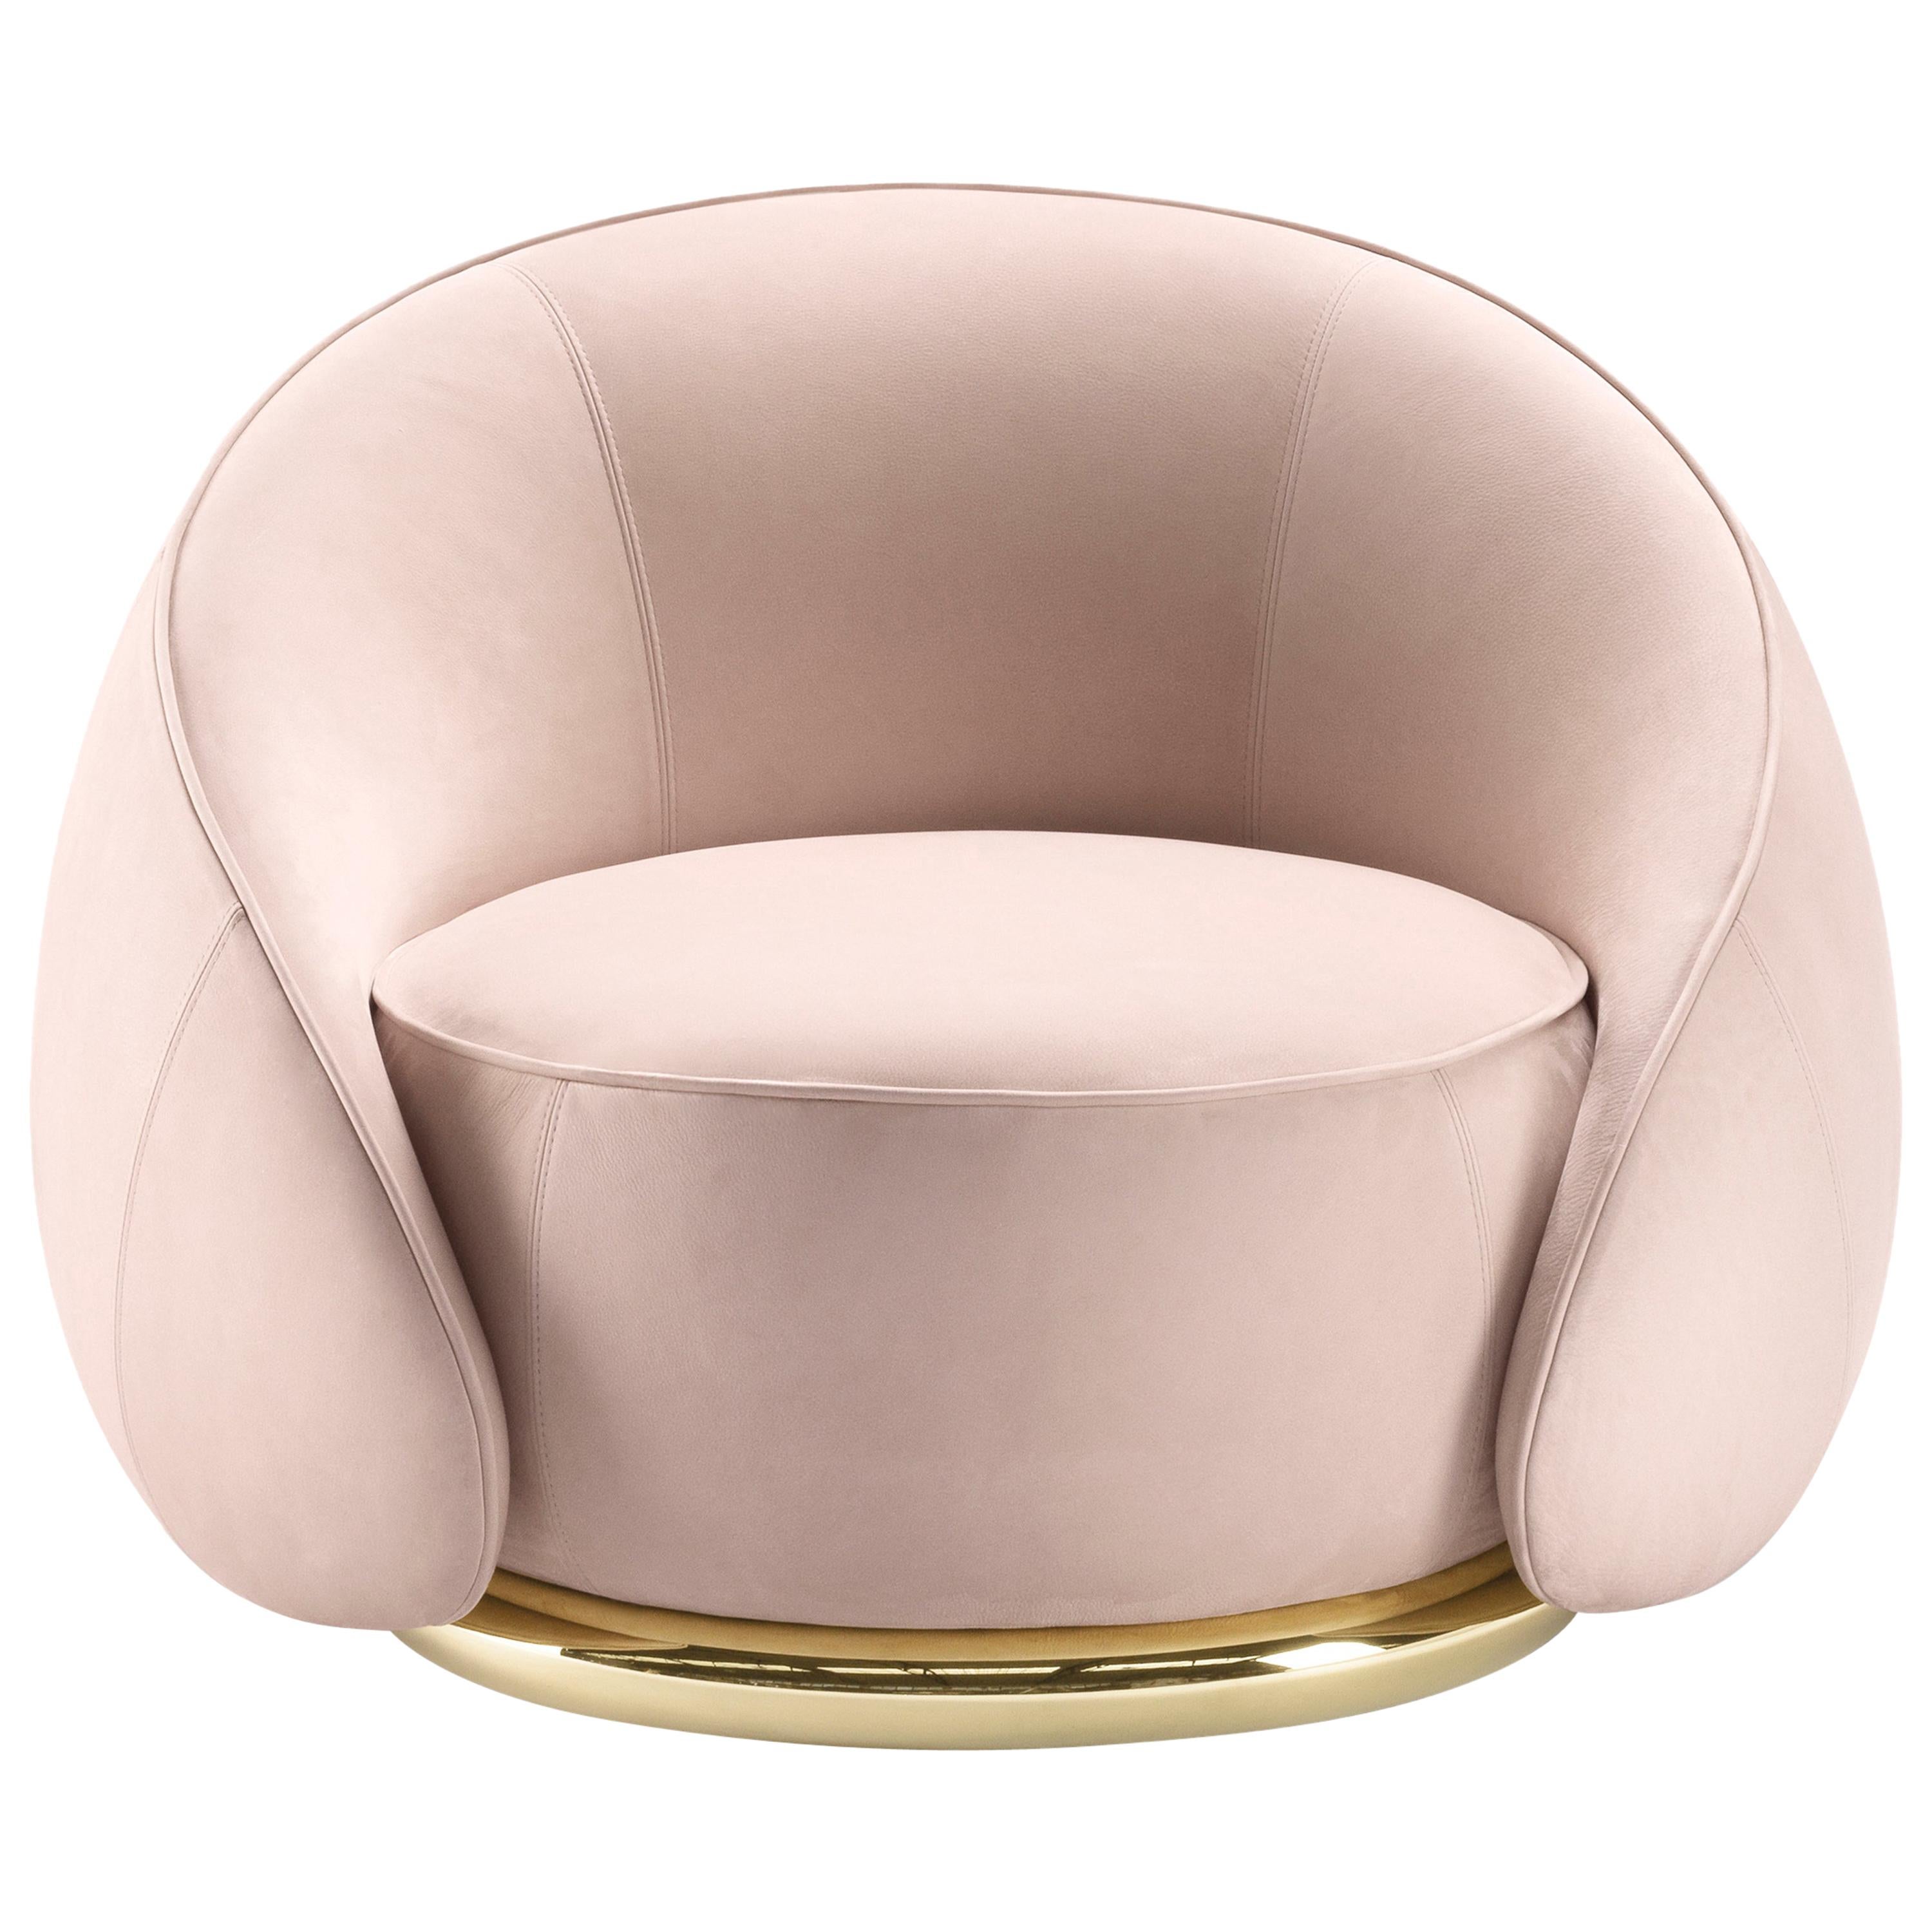 Ghidini 1961 Abbracci Armchair in Pink Leather with Brass Base by L. Bozzoli For Sale